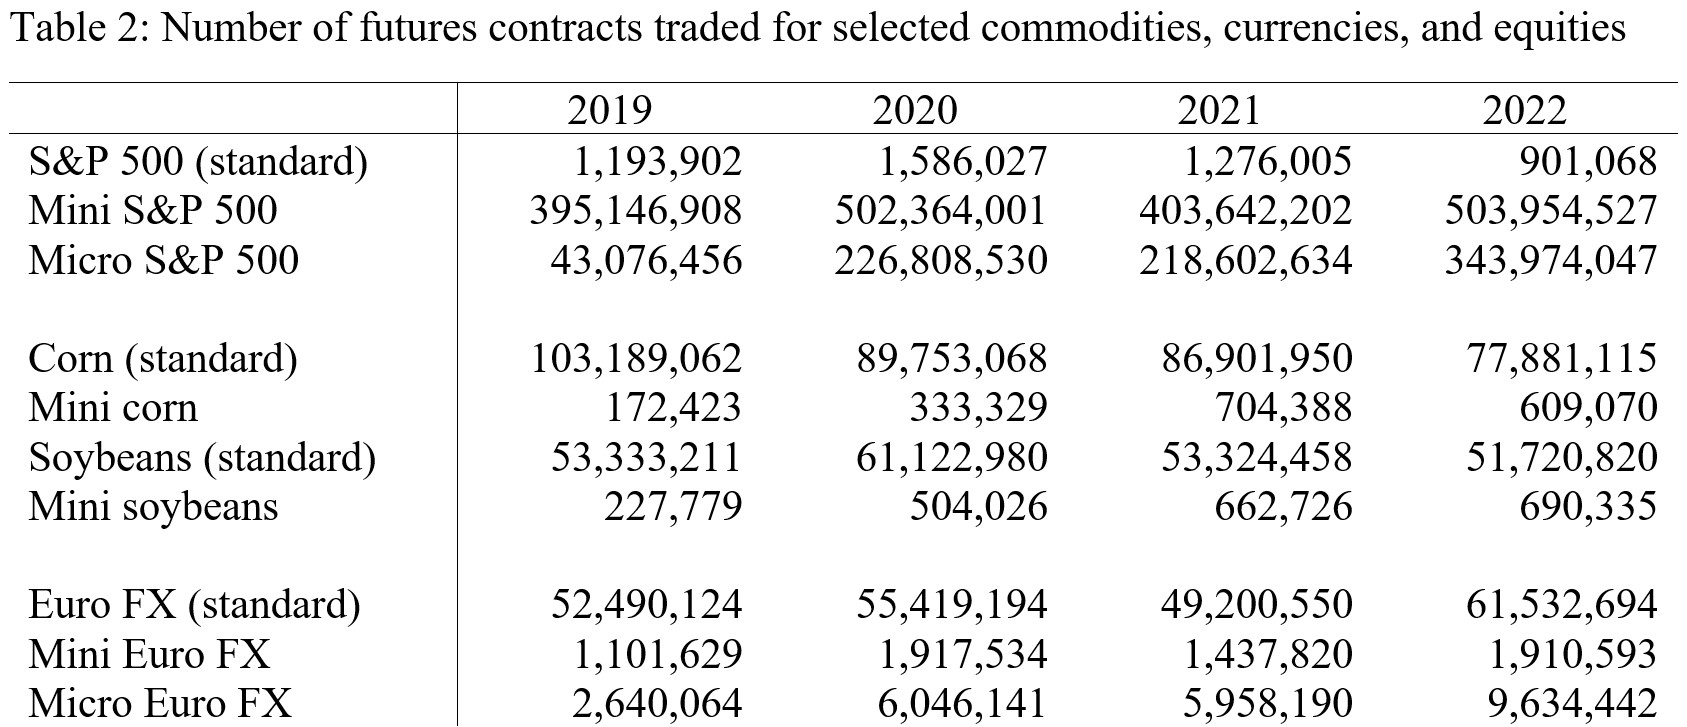 Table 2: Number of futures contracts traded